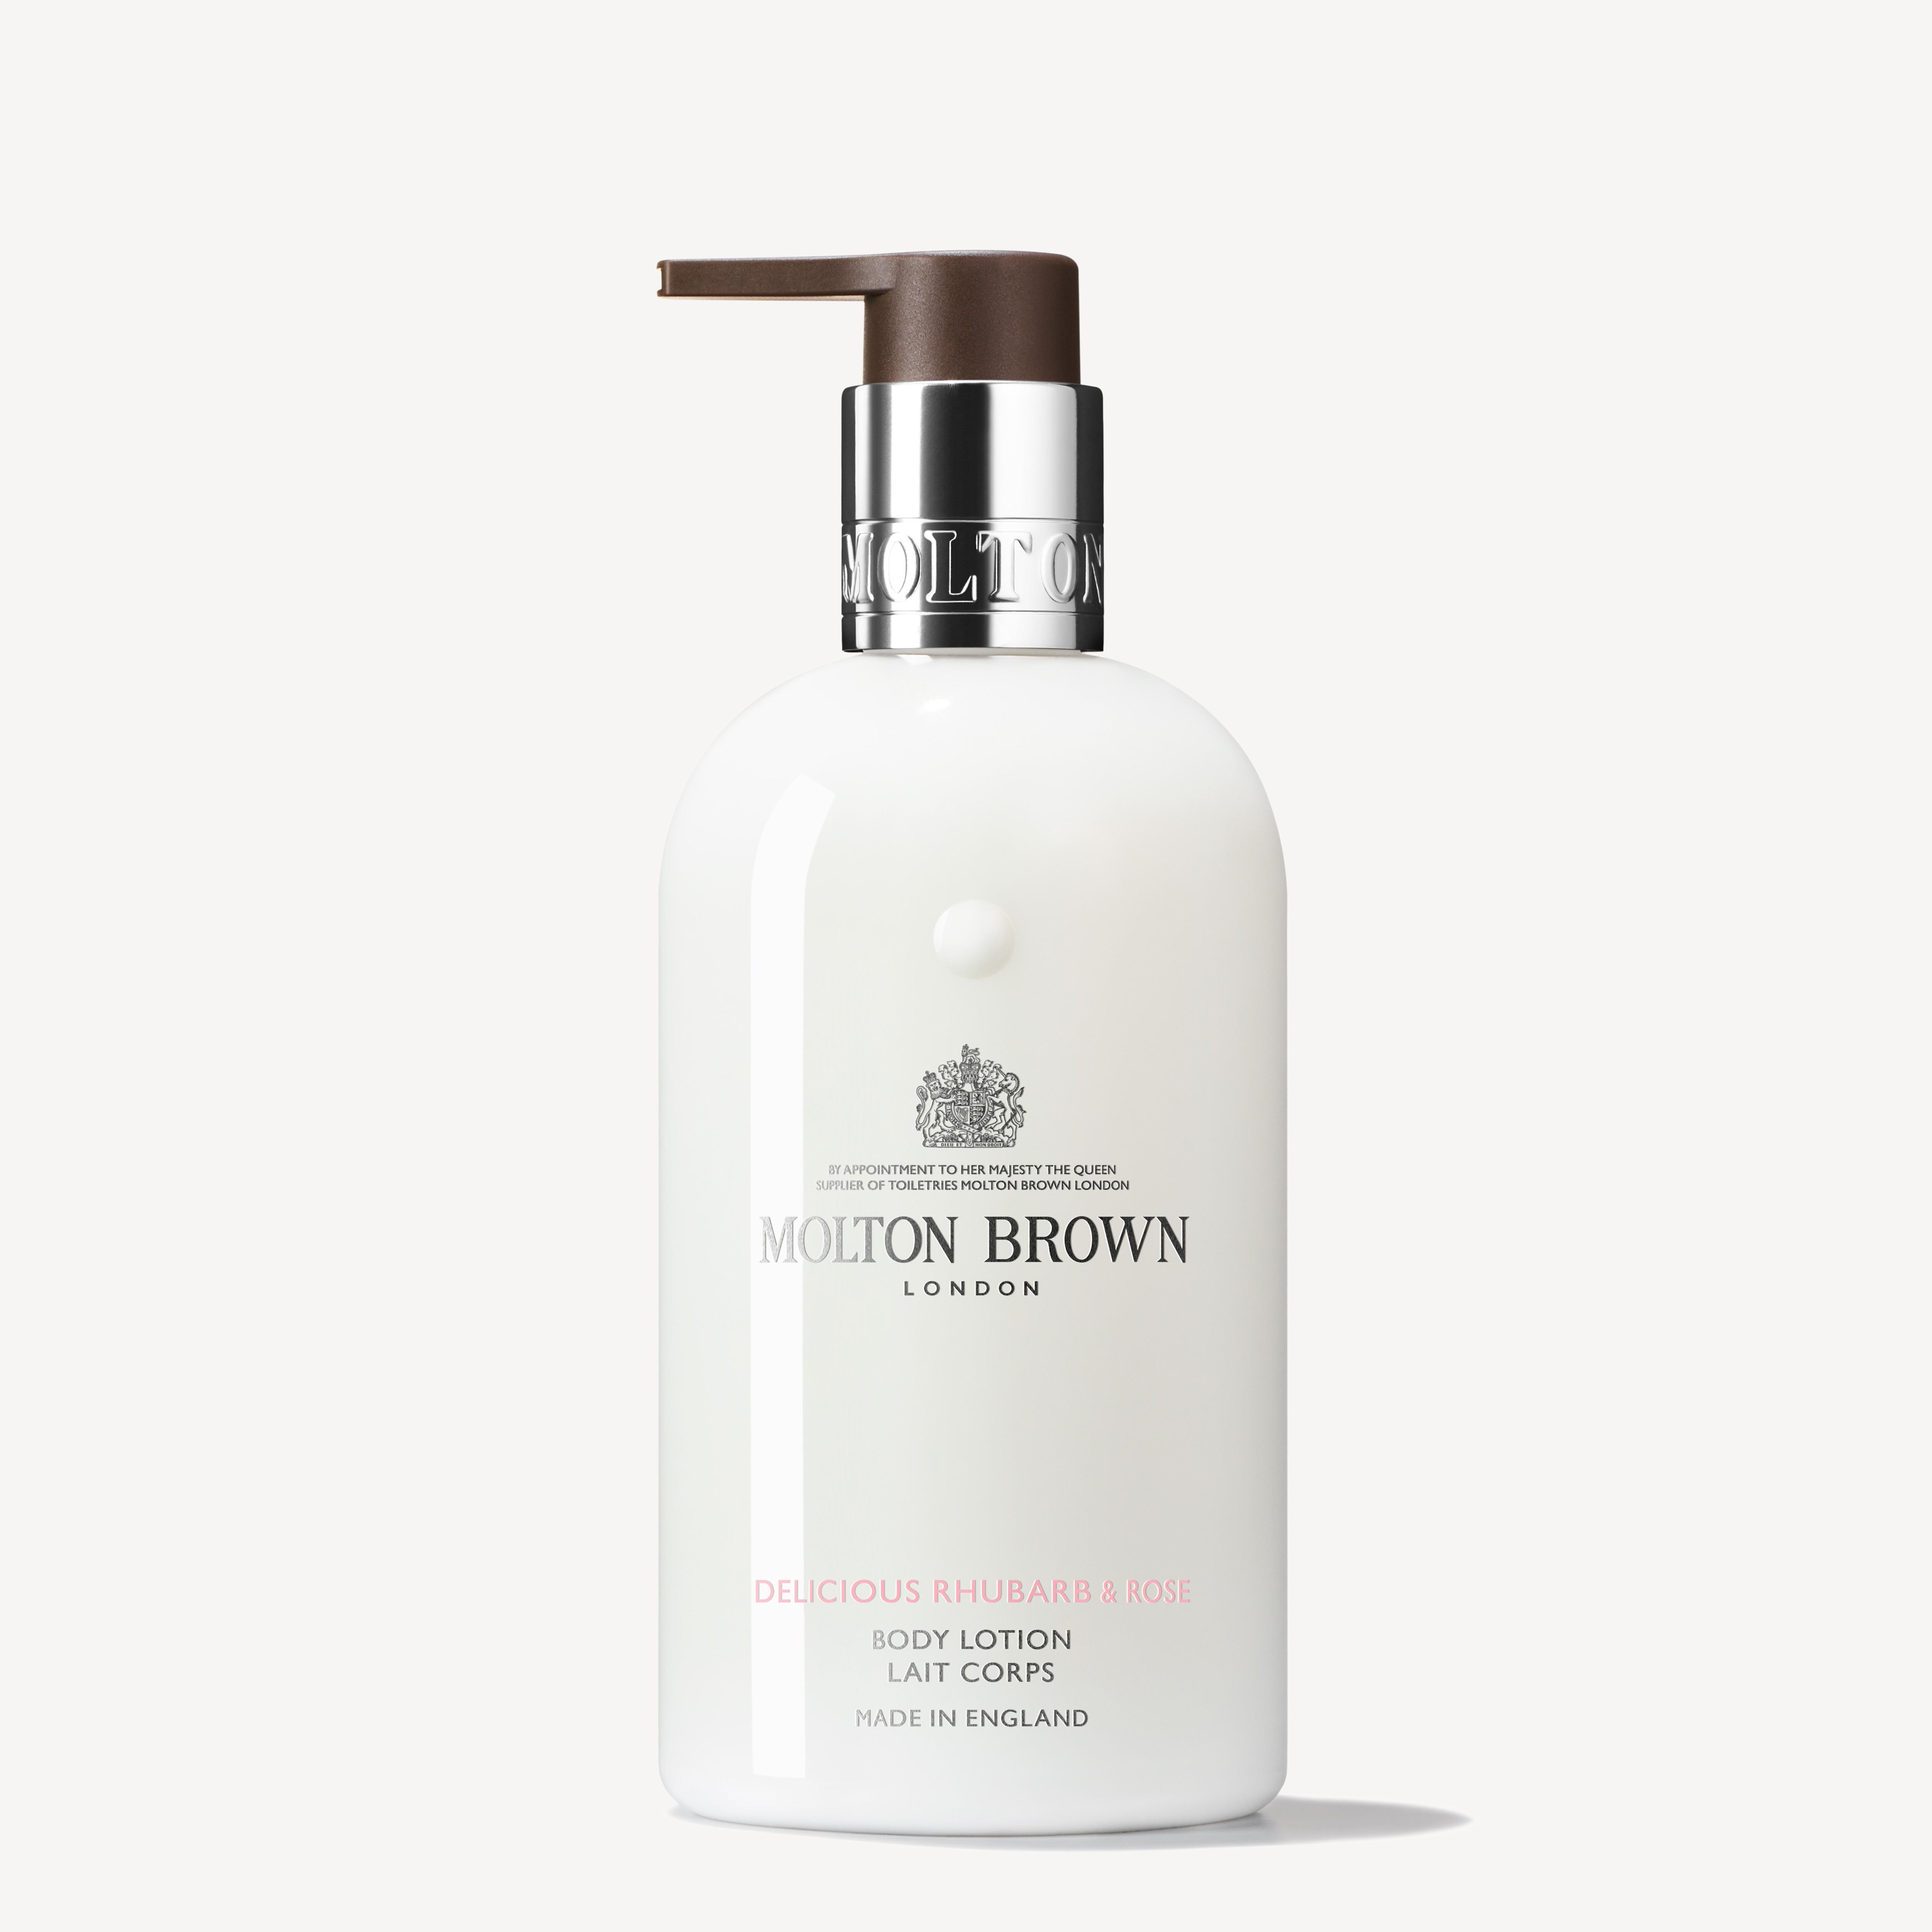 Molton Brown Delicious Rhubarb & Rose Body Lotion 300ml